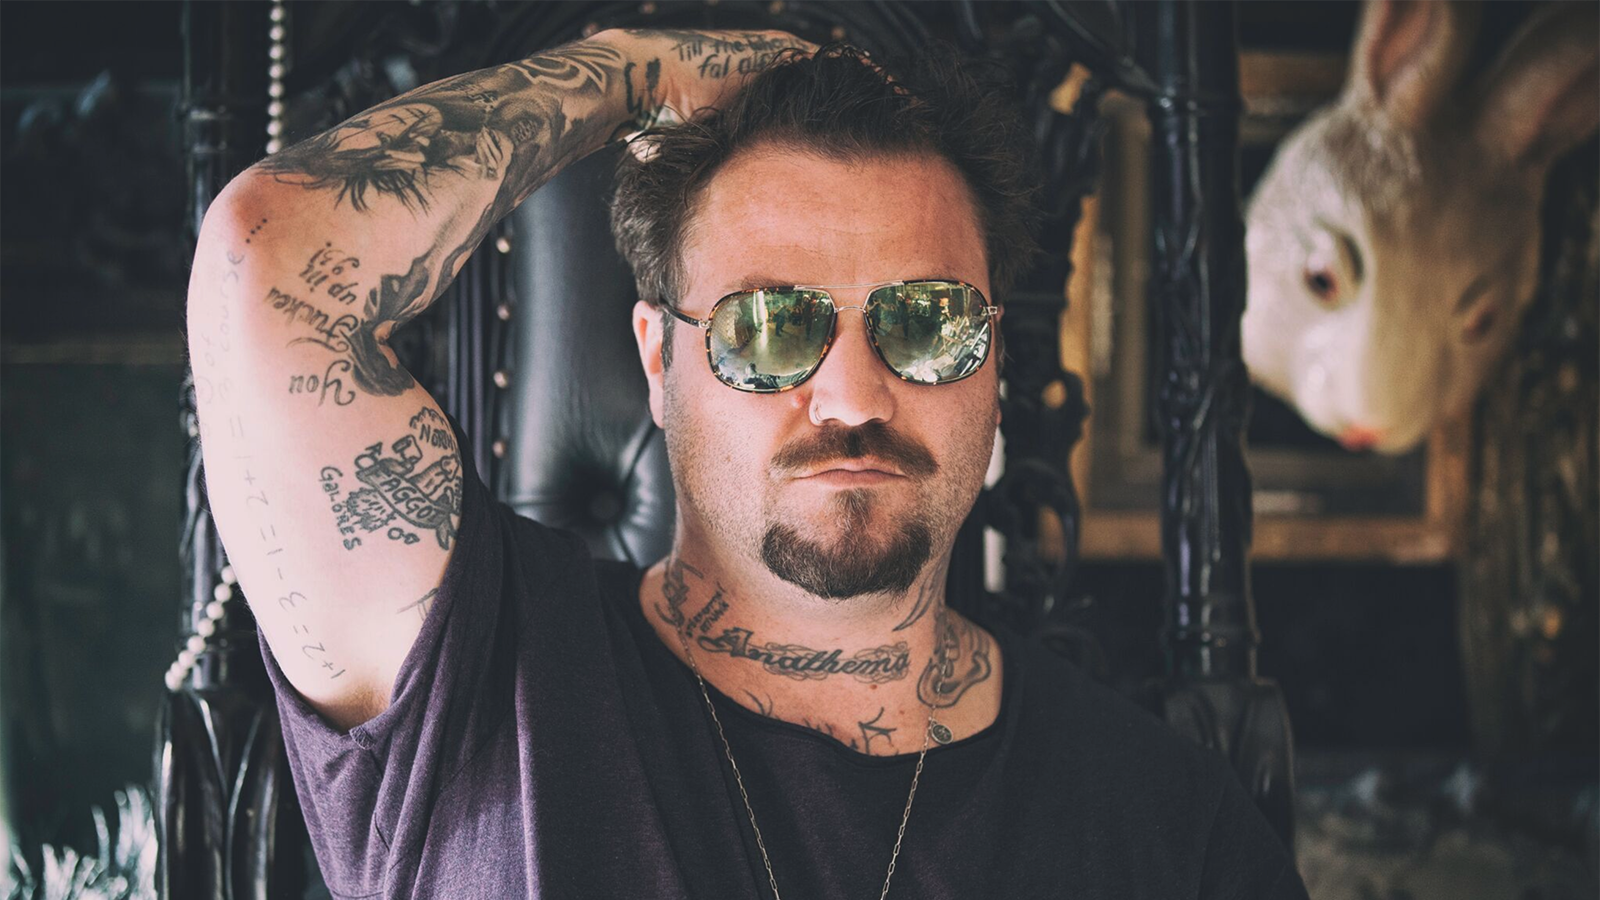 Bam Margera Leaves Rehab: I Realized When I Am Bored Is When I Drink